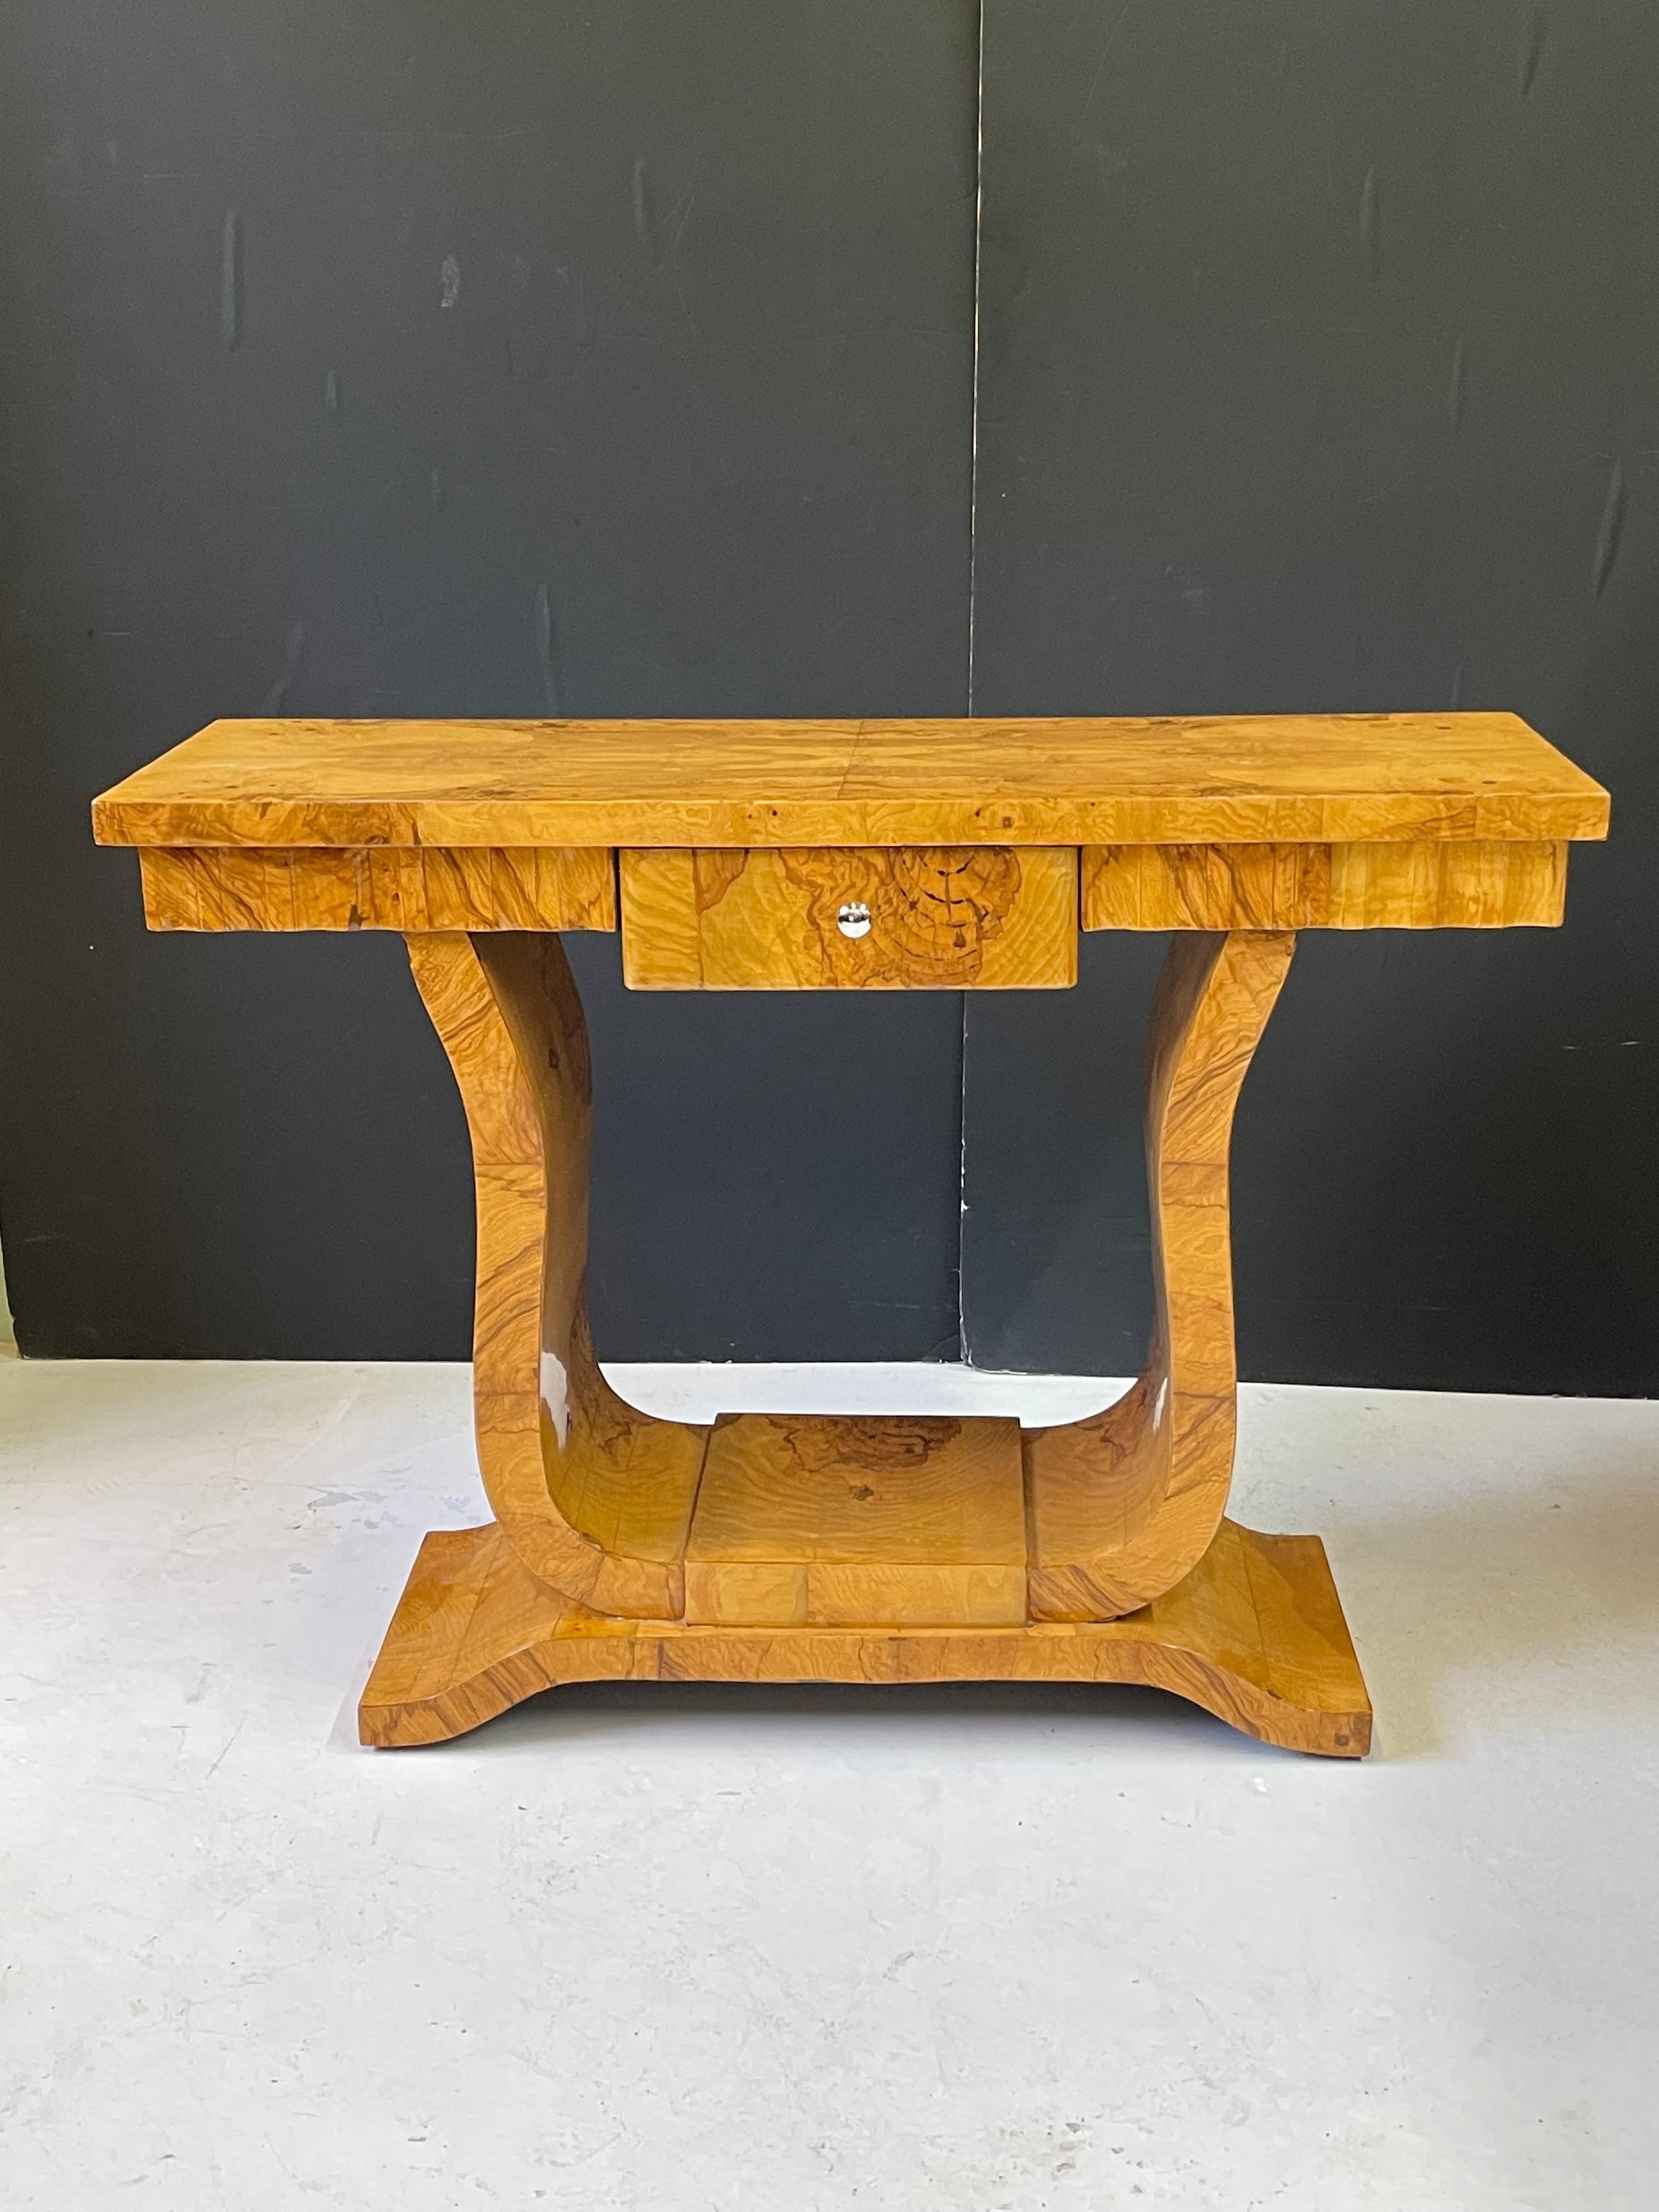 This is an incredible 20th century Italian console table designed in the style of Art Deco and constructed of a striking birch burl veneer. The rectangular top holds a center drawer in its frieze (accented with chrome hardware) and is surrounded on